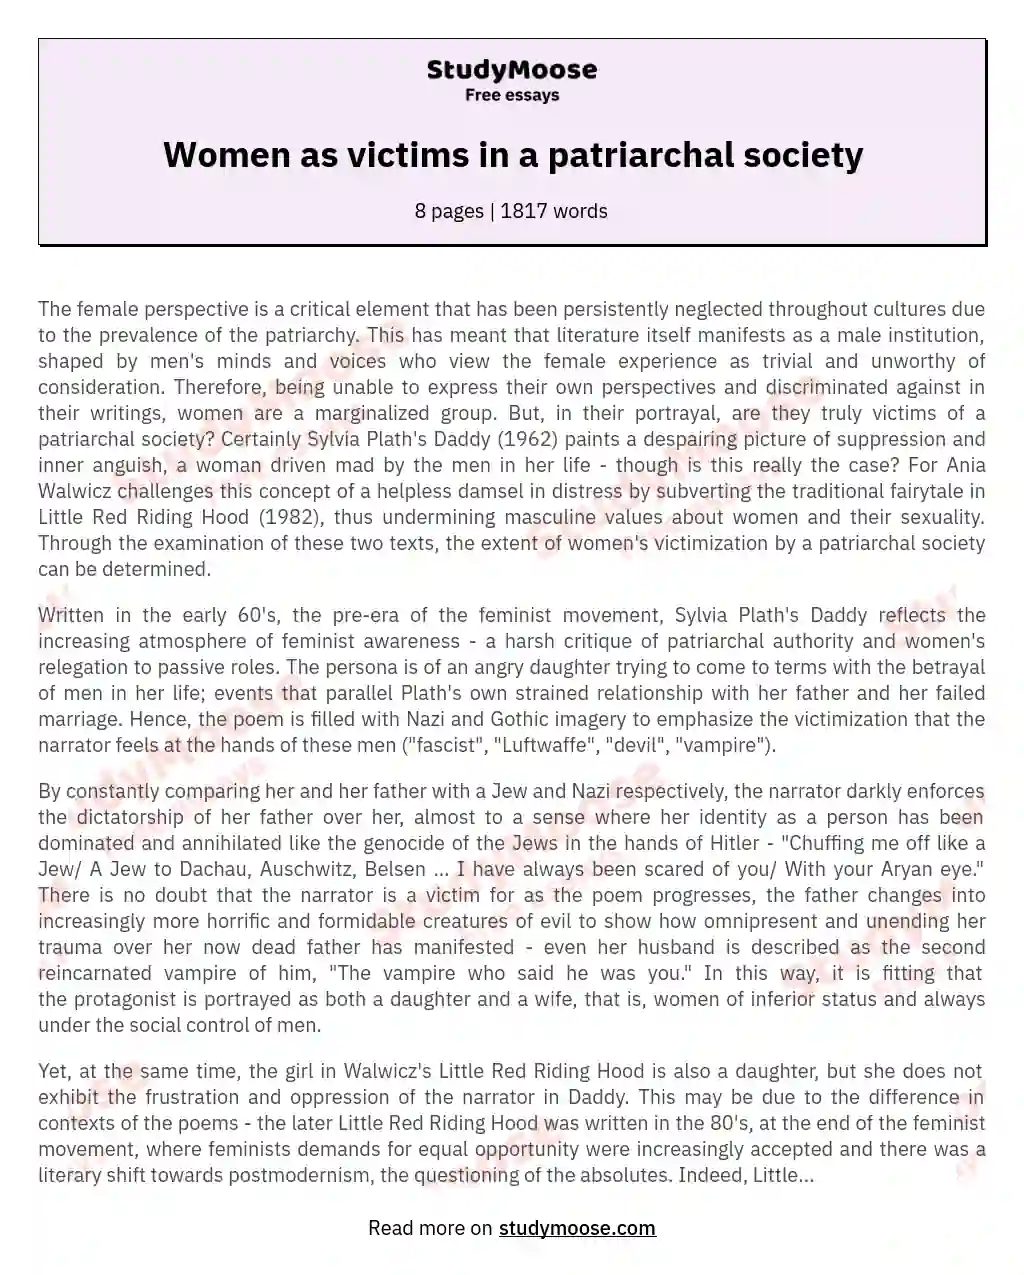 Women as victims in a patriarchal society